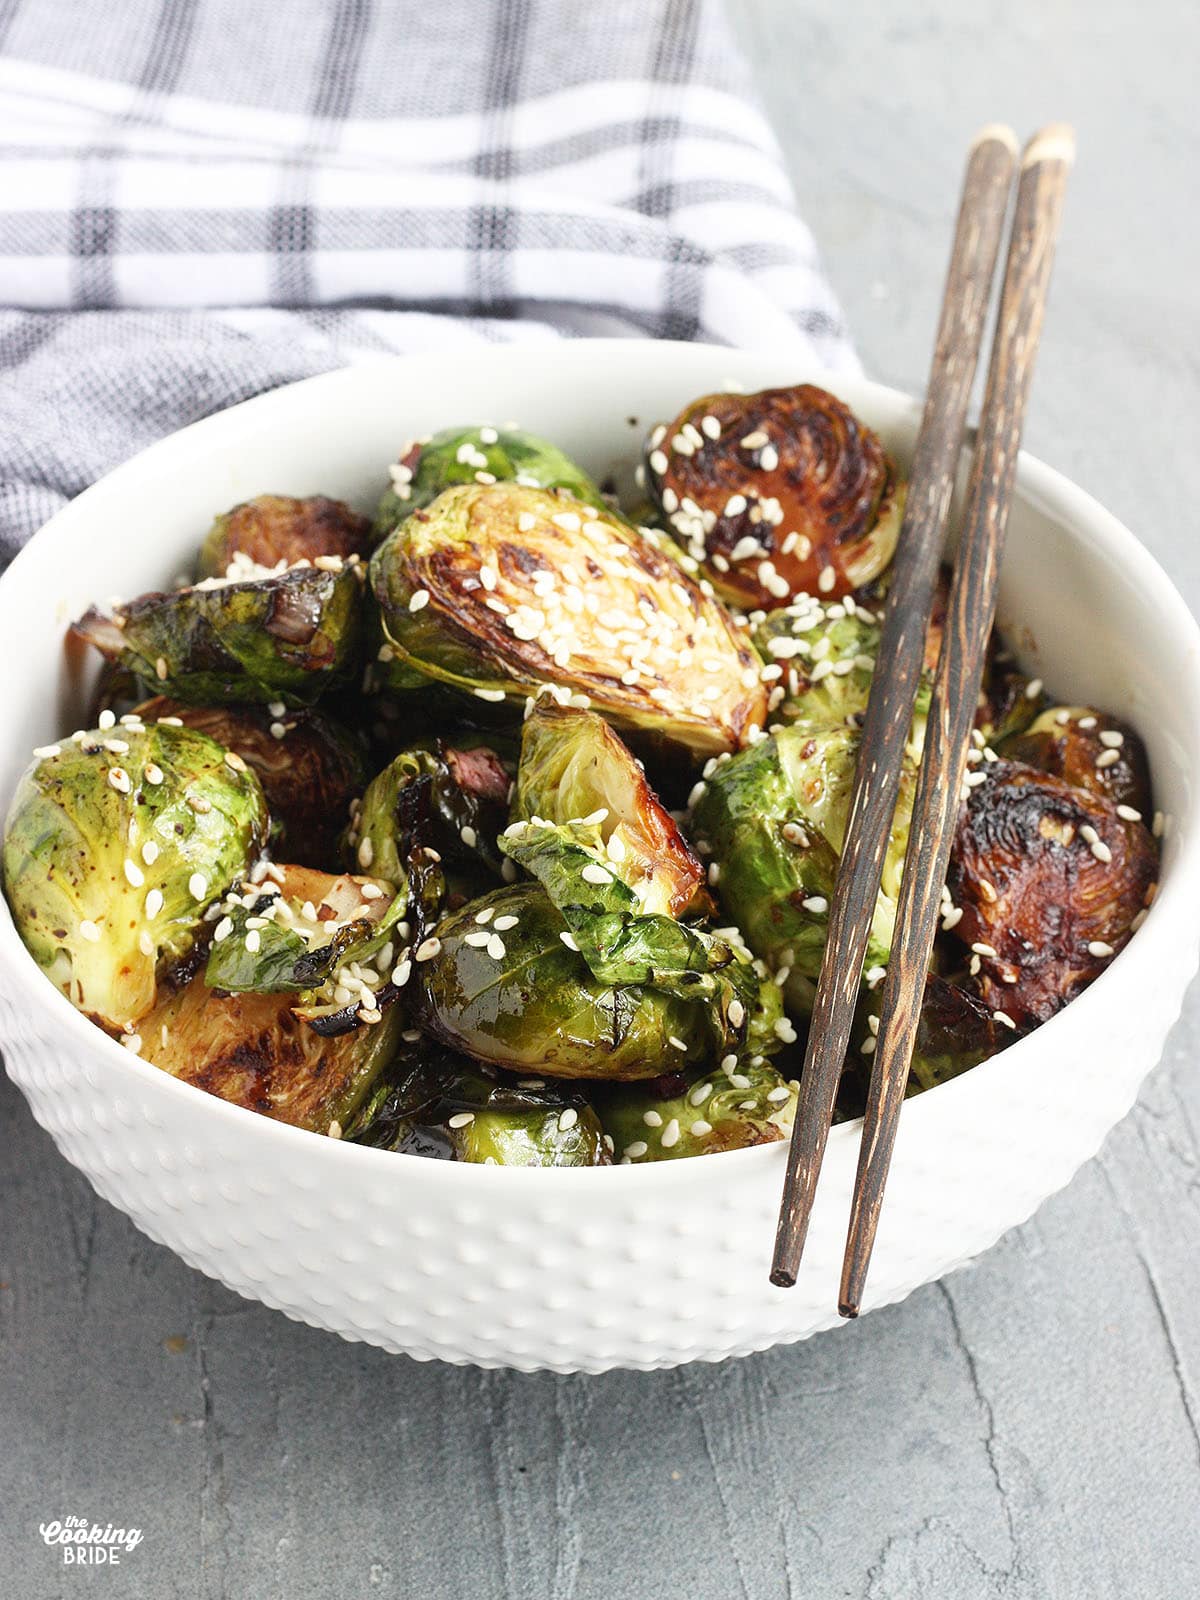 Stir fried Brussels sprouts garnished with sesame seeds in a white bowl with wooden chopsticks resting on the side of the bowl.